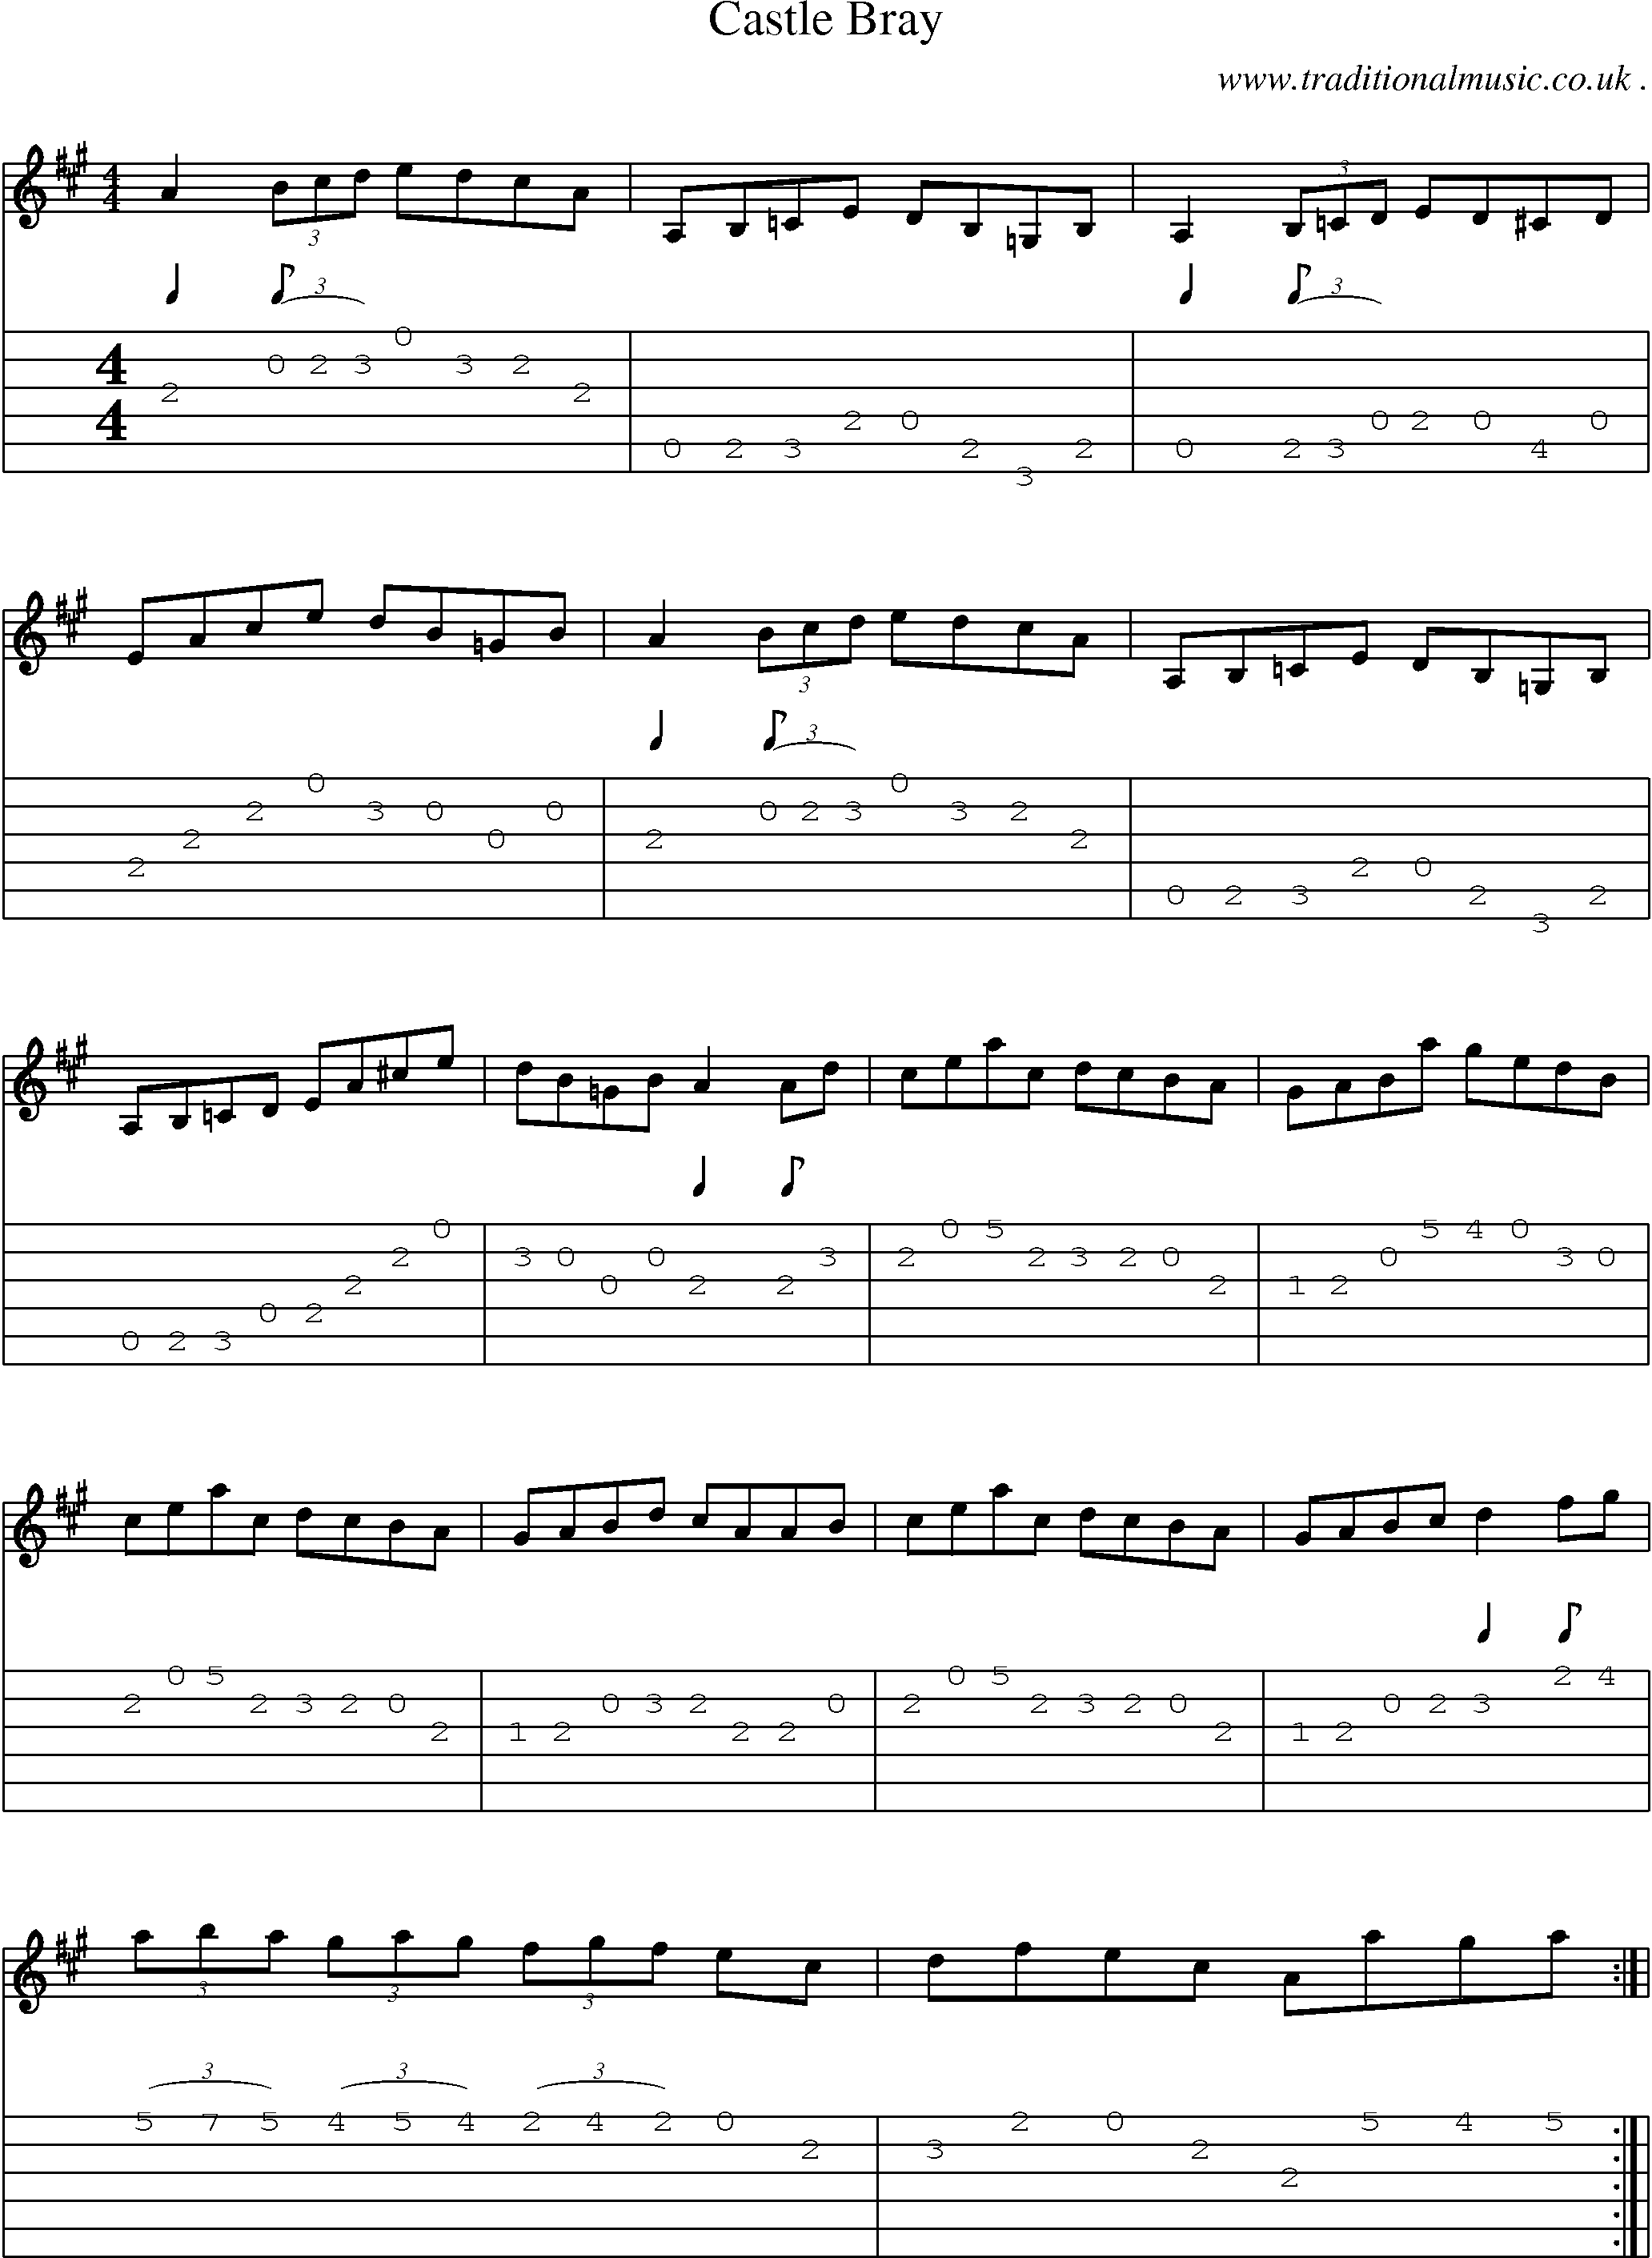 Sheet-Music and Guitar Tabs for Castle Bray